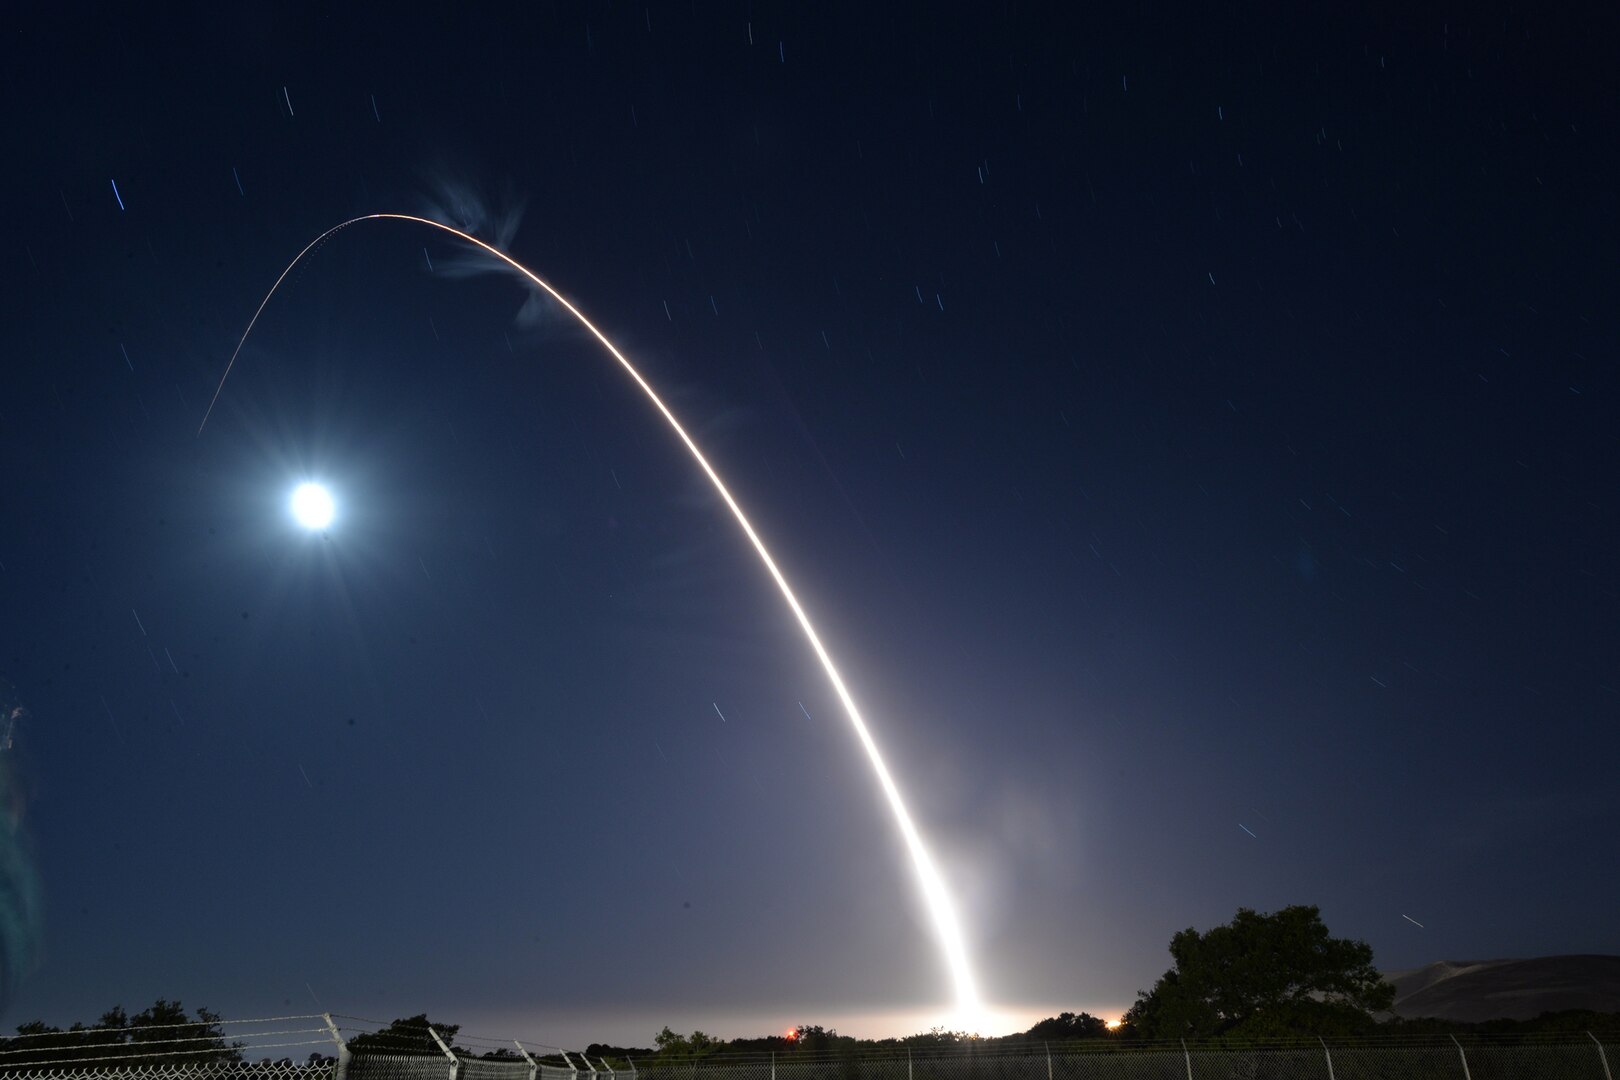 An unarmed Air Force Minuteman III intercontinental ballistic missile launches during an operational test at Vandenberg Air Force Base, California. A team of Air Force Global Strike Command airmen assigned to the 341st Missile Wing at Malmstrom Air Force Base, Montana, launched the Minuteman III ICBM equipped with a single test re-entry vehicle.